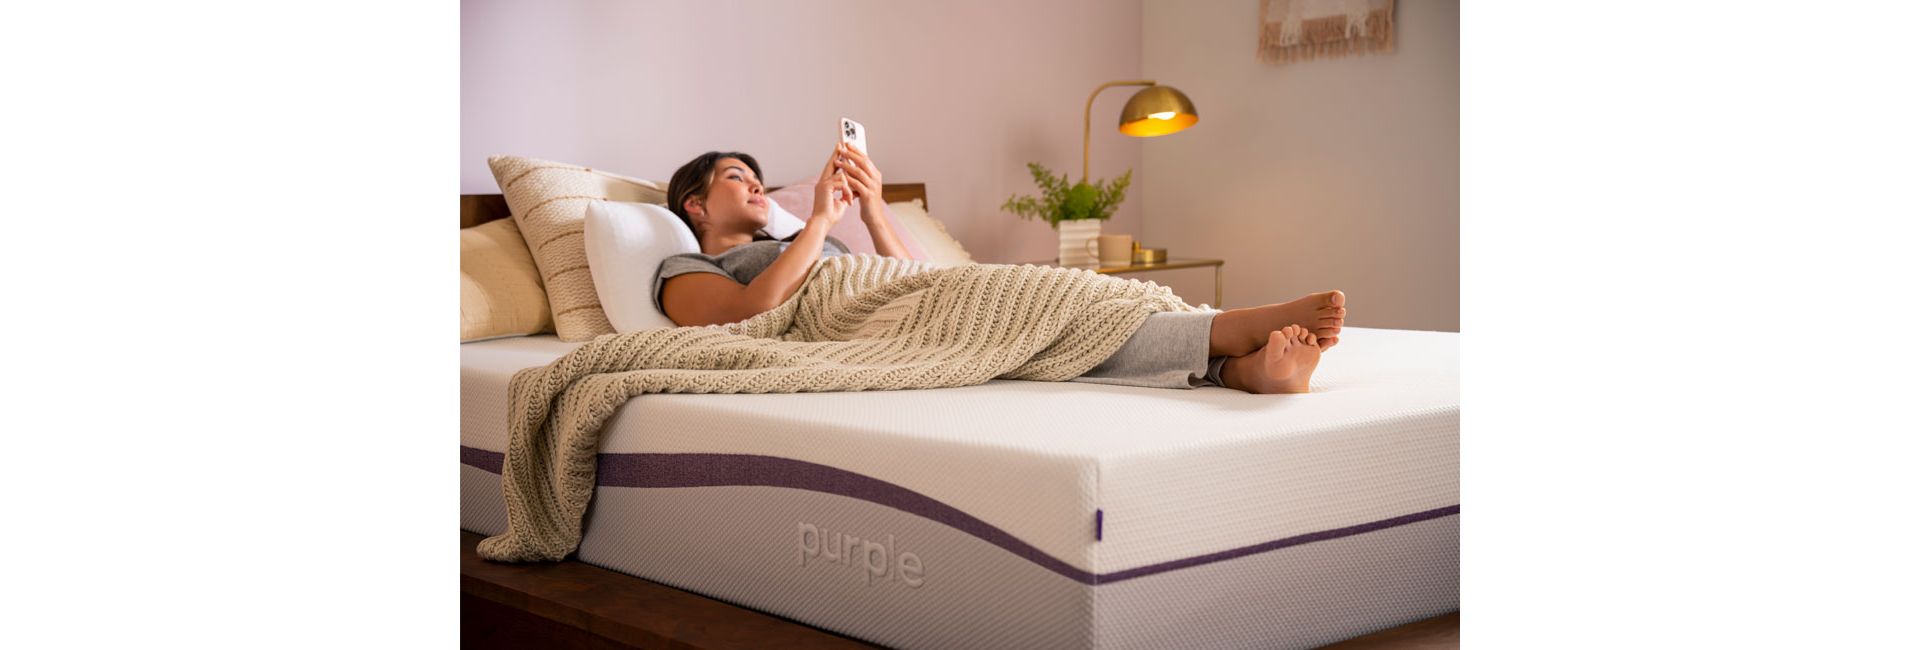 Woman Laying on Purple Mattress with Blanket looking at phone